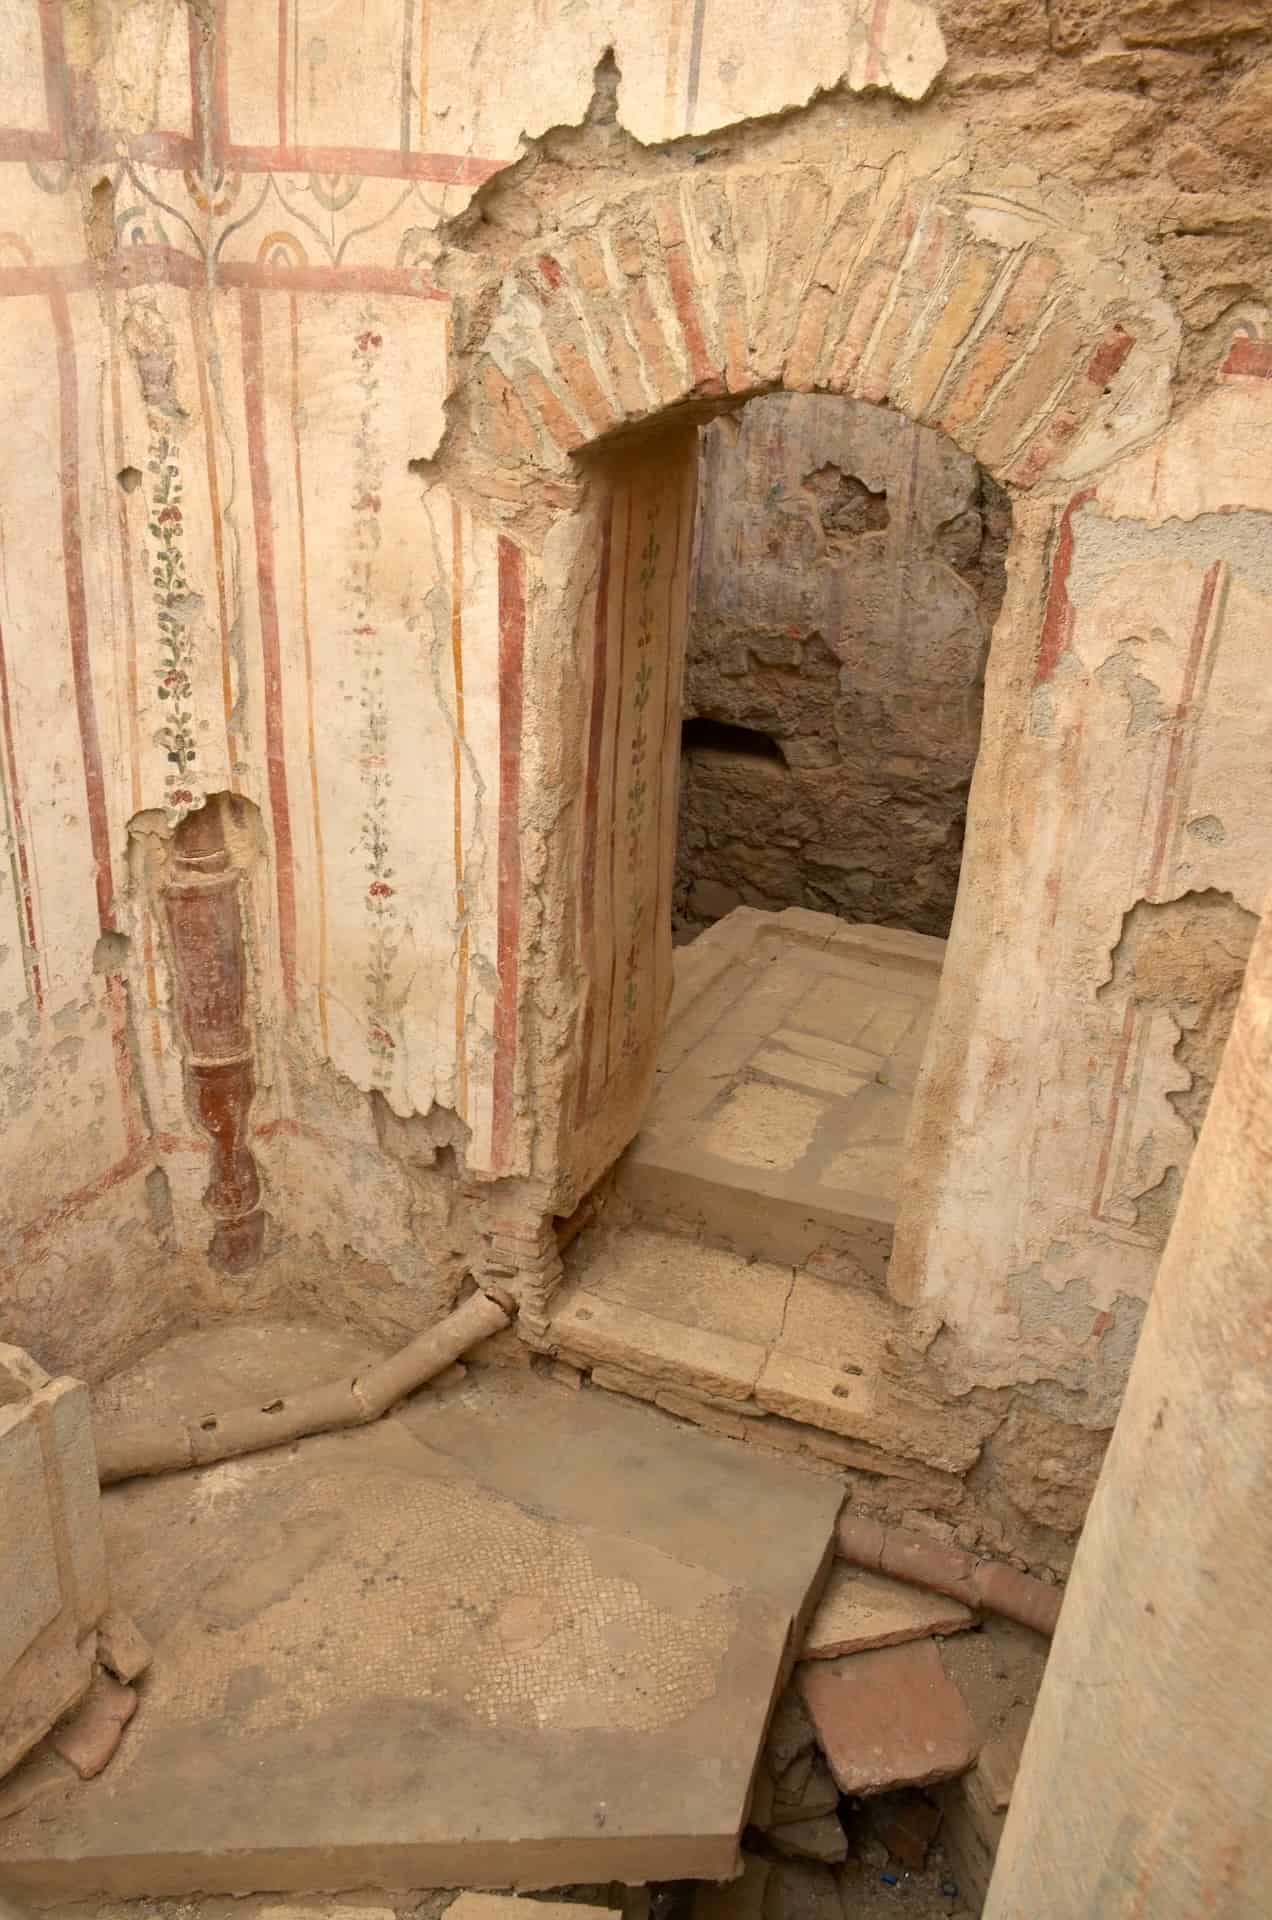 Latrine in Dwelling Unit 2 in the Terrace Houses at Ephesus